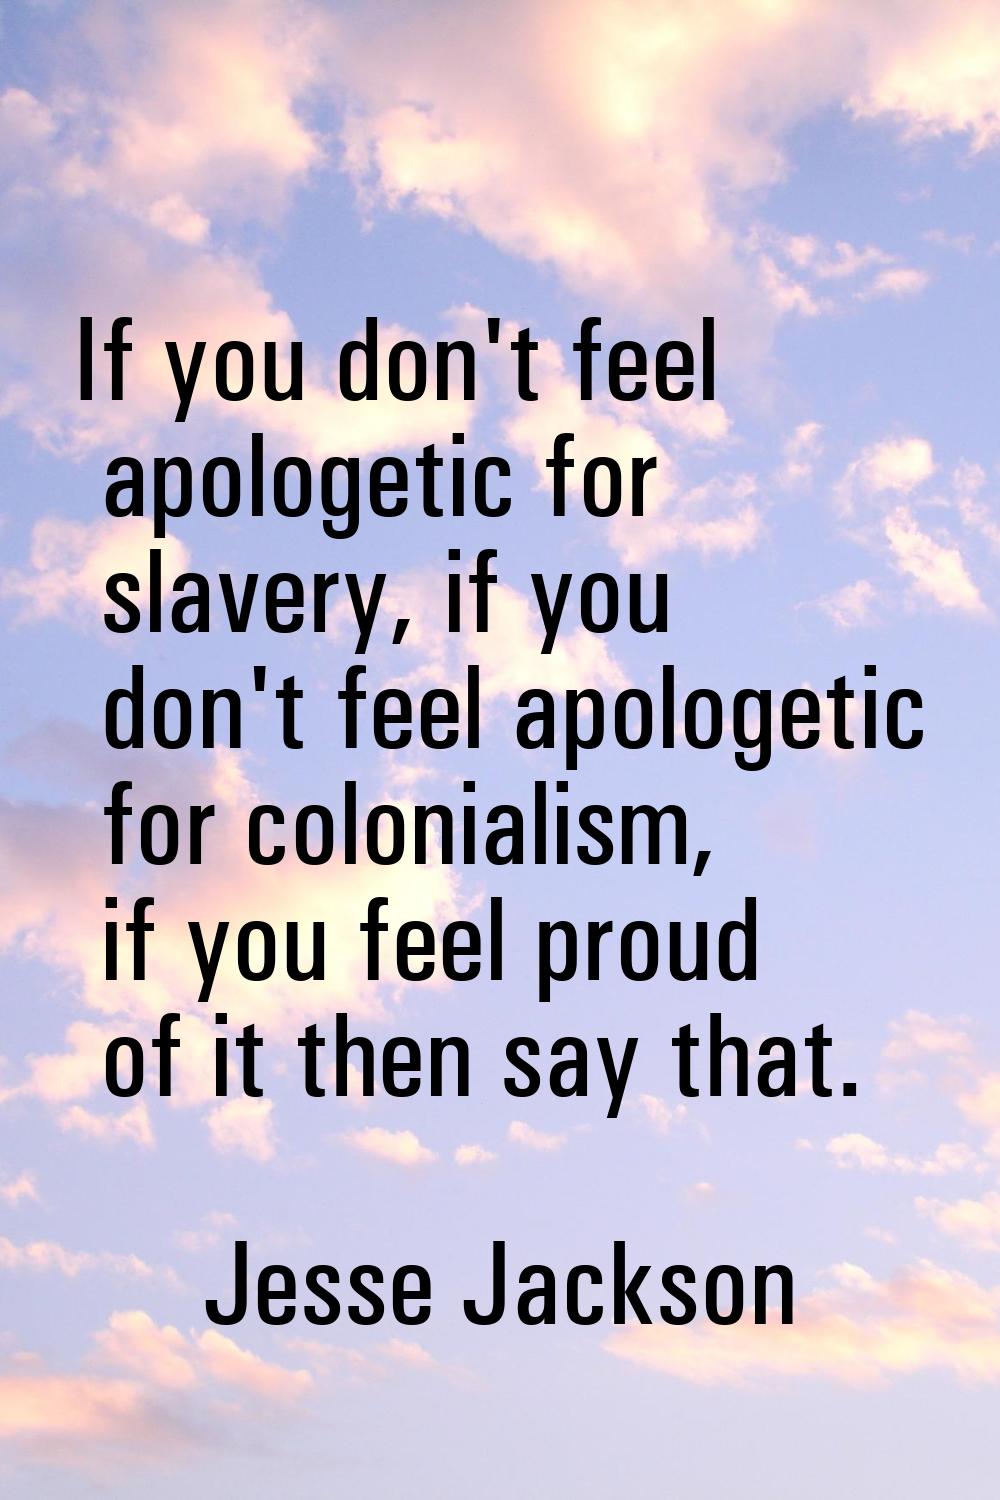 If you don't feel apologetic for slavery, if you don't feel apologetic for colonialism, if you feel